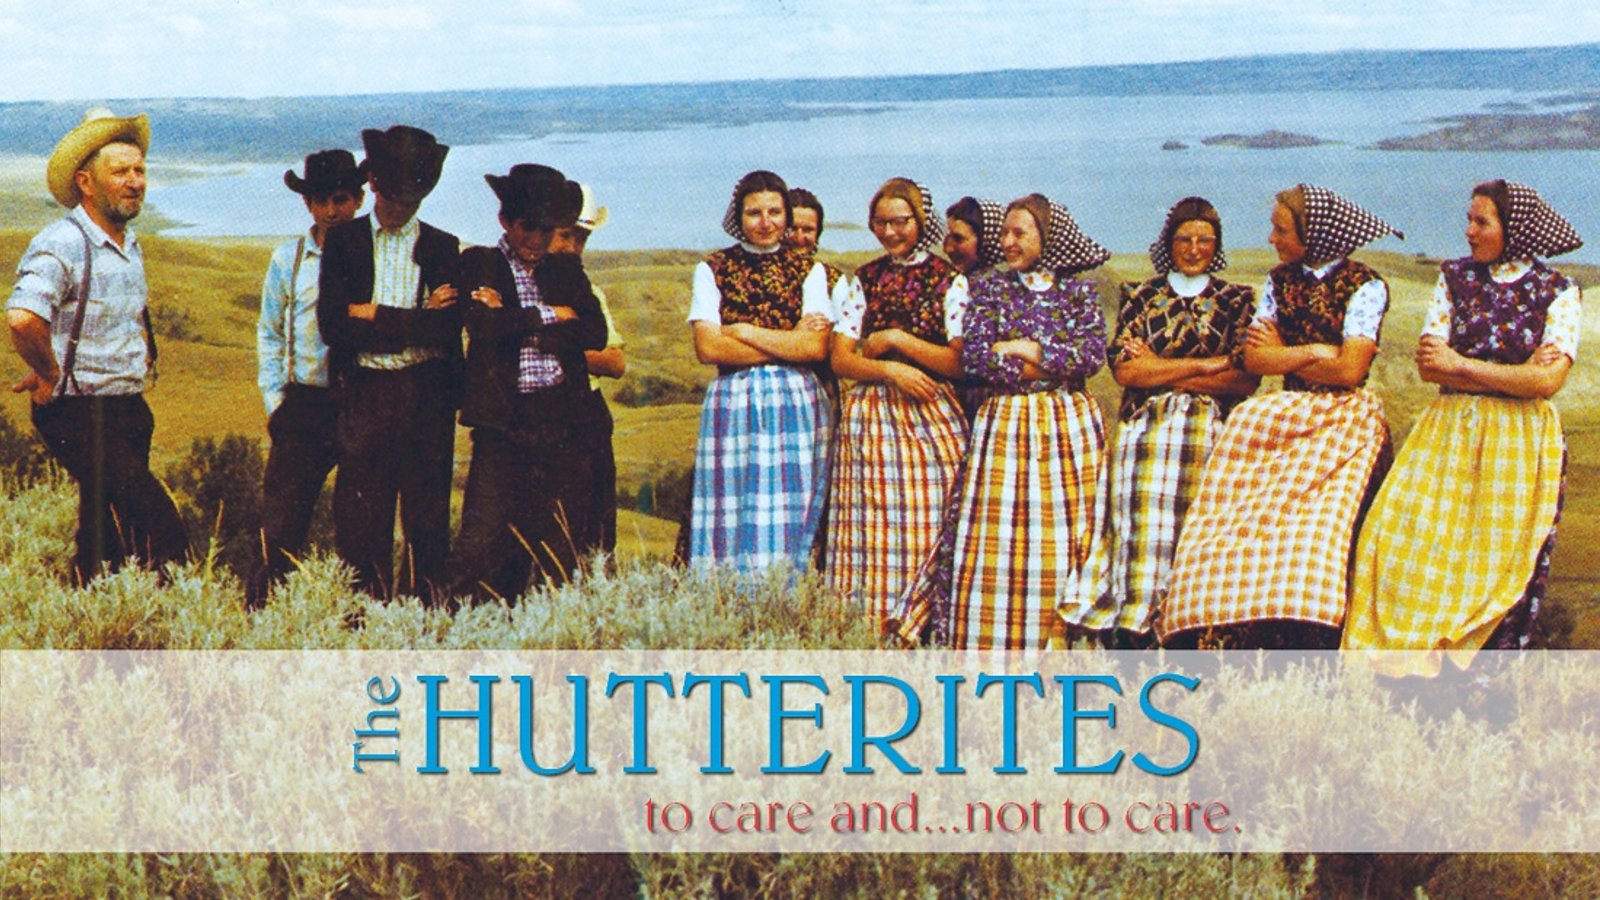 Hutterites: To Care and Not to Care